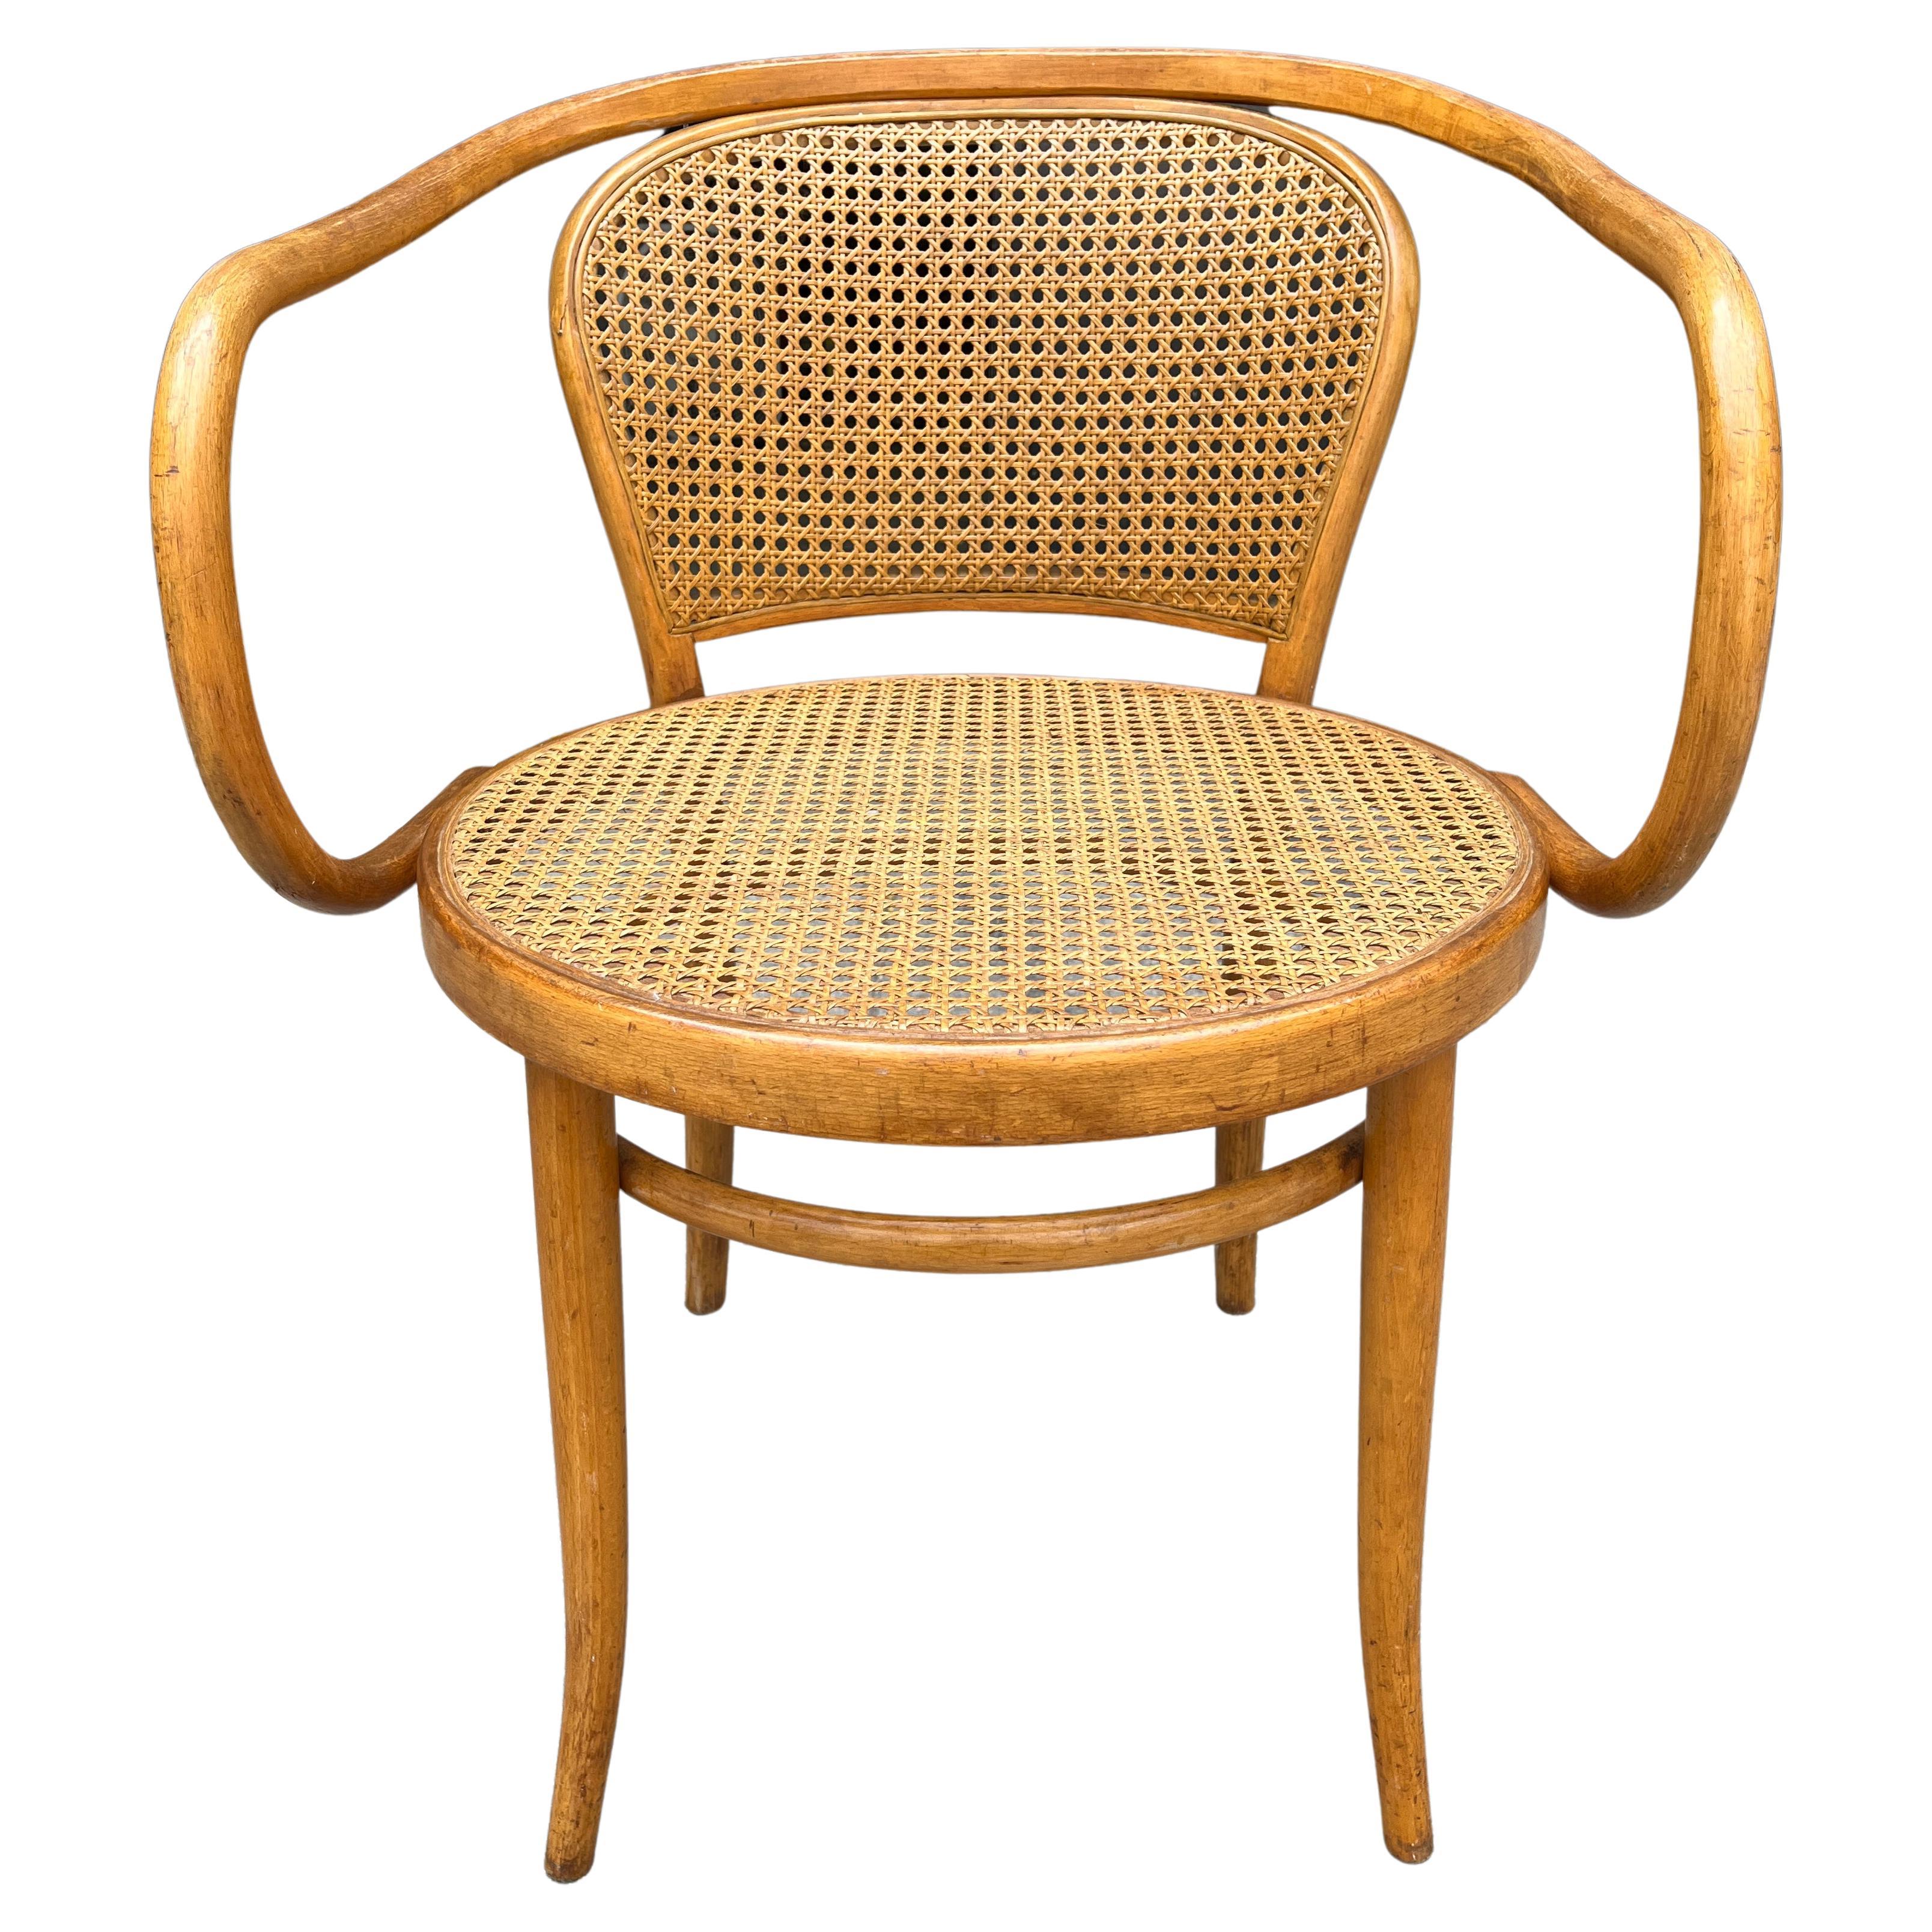 Chair nr 210 designed by Gebrüder Thonet in 1900, (as well as nr 209) of renown designer Le Corbusier. 
This chair is made in Czechoslovakia  (pre WW2 factory of Thonet).

New cane color matched 
arm height 27.5''